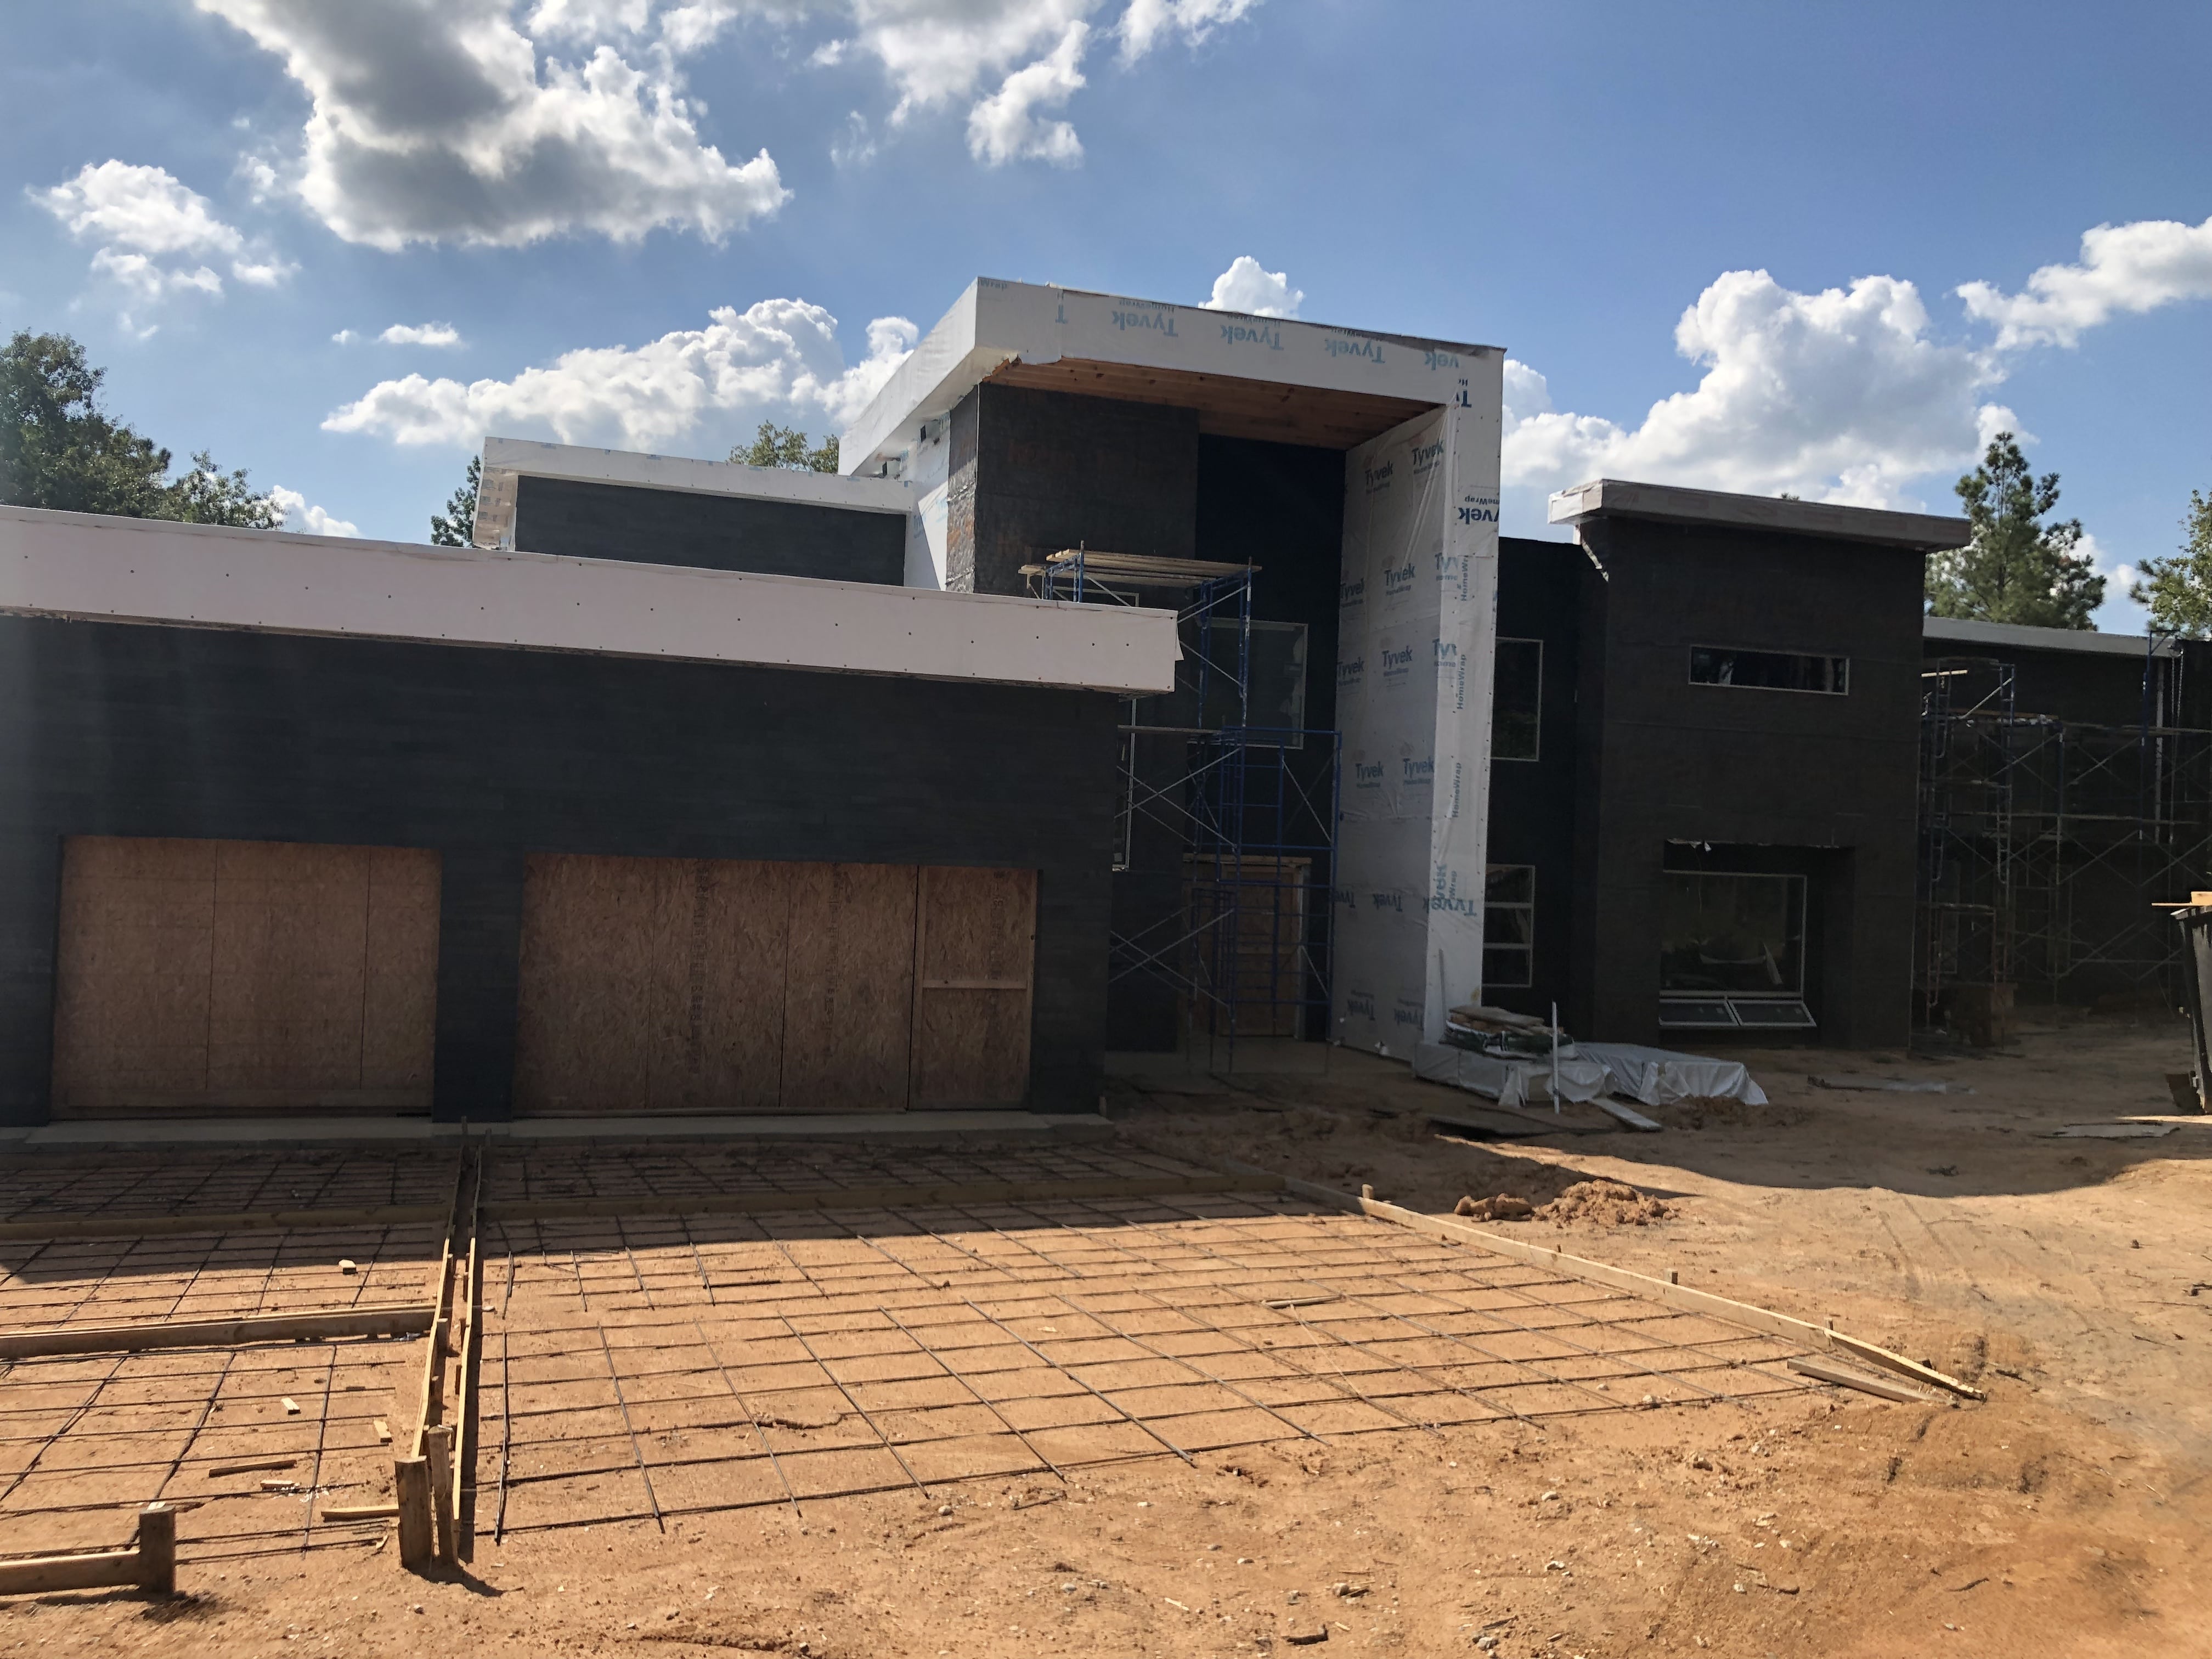 Norstone Graphite Planc Large Format Tile on the facade of a modern home under construction